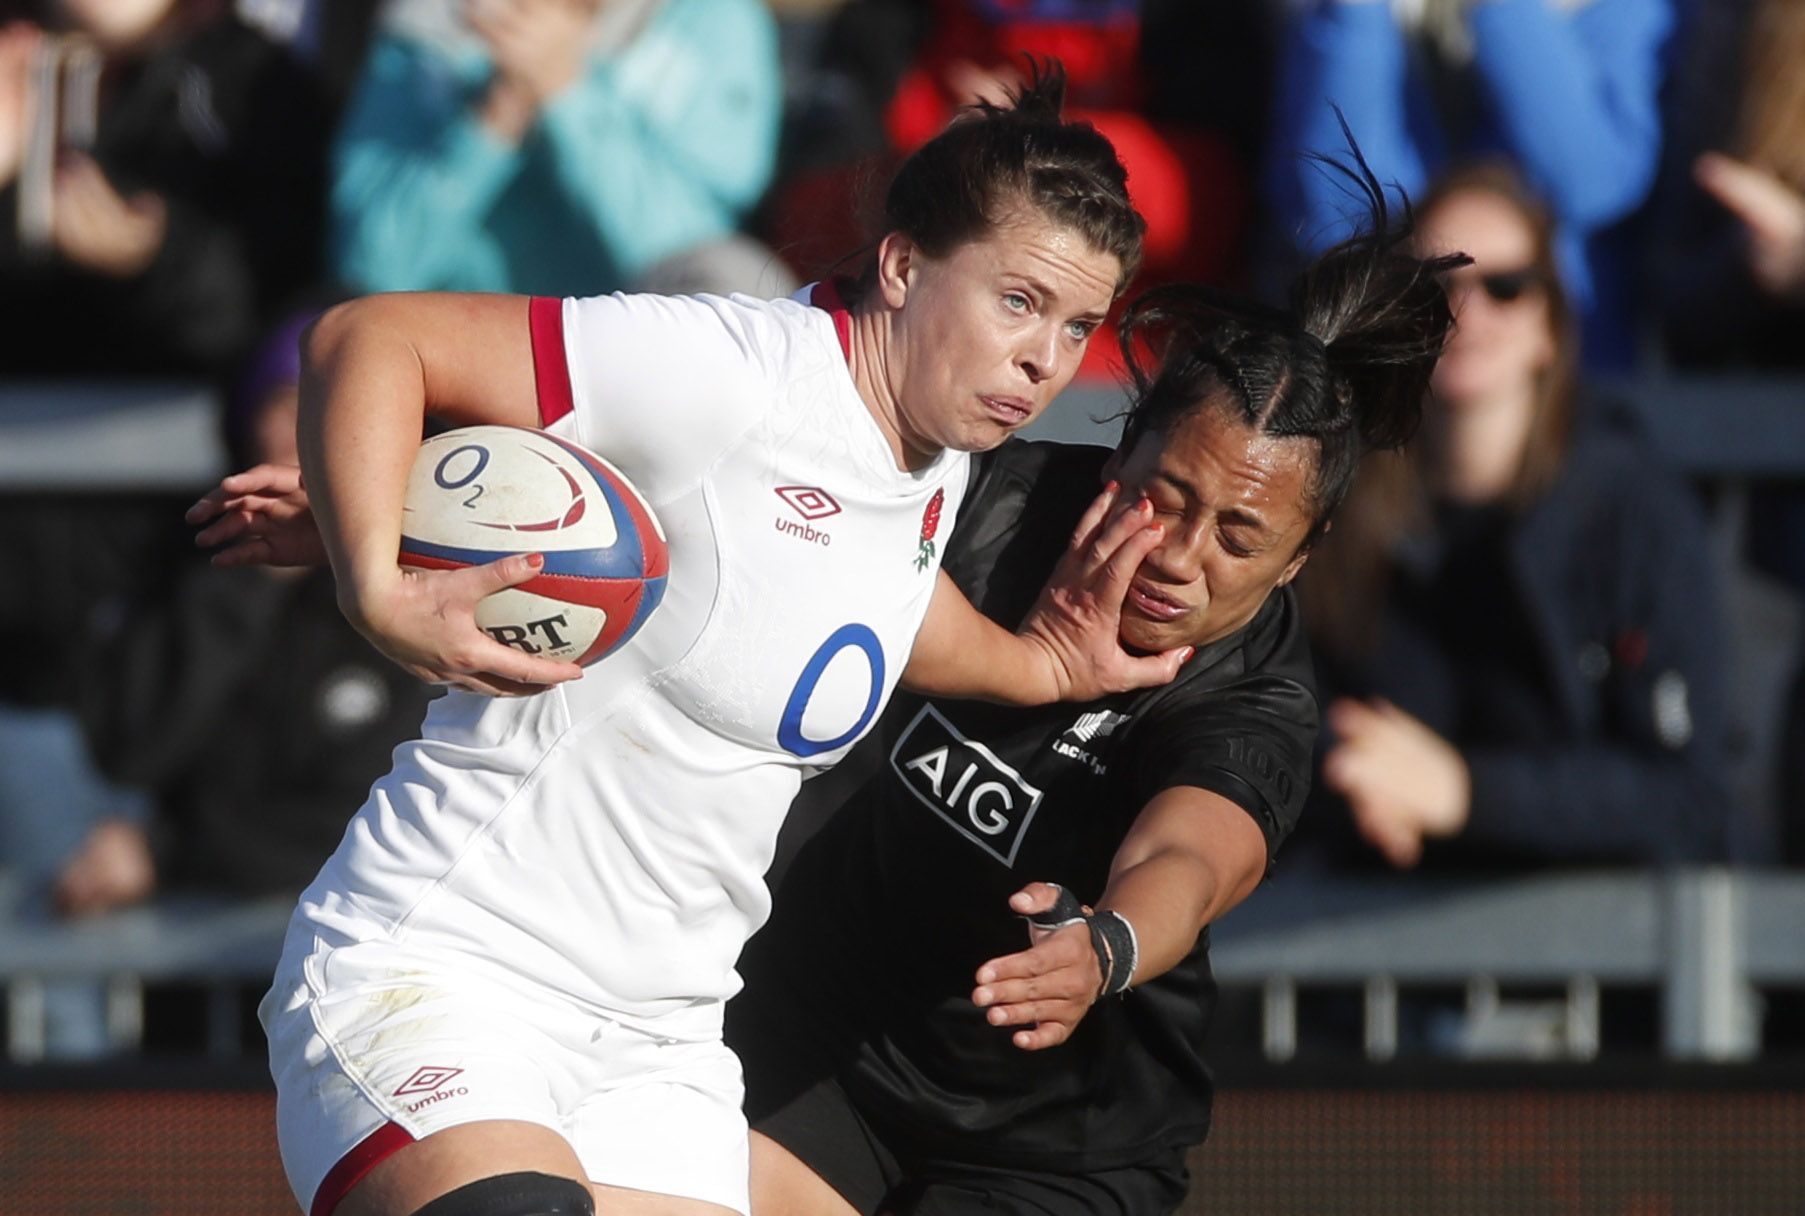 England's Abbie Ward fends off New Zealand's Dhys Faleafaga. Photo: Action Images via Reuters